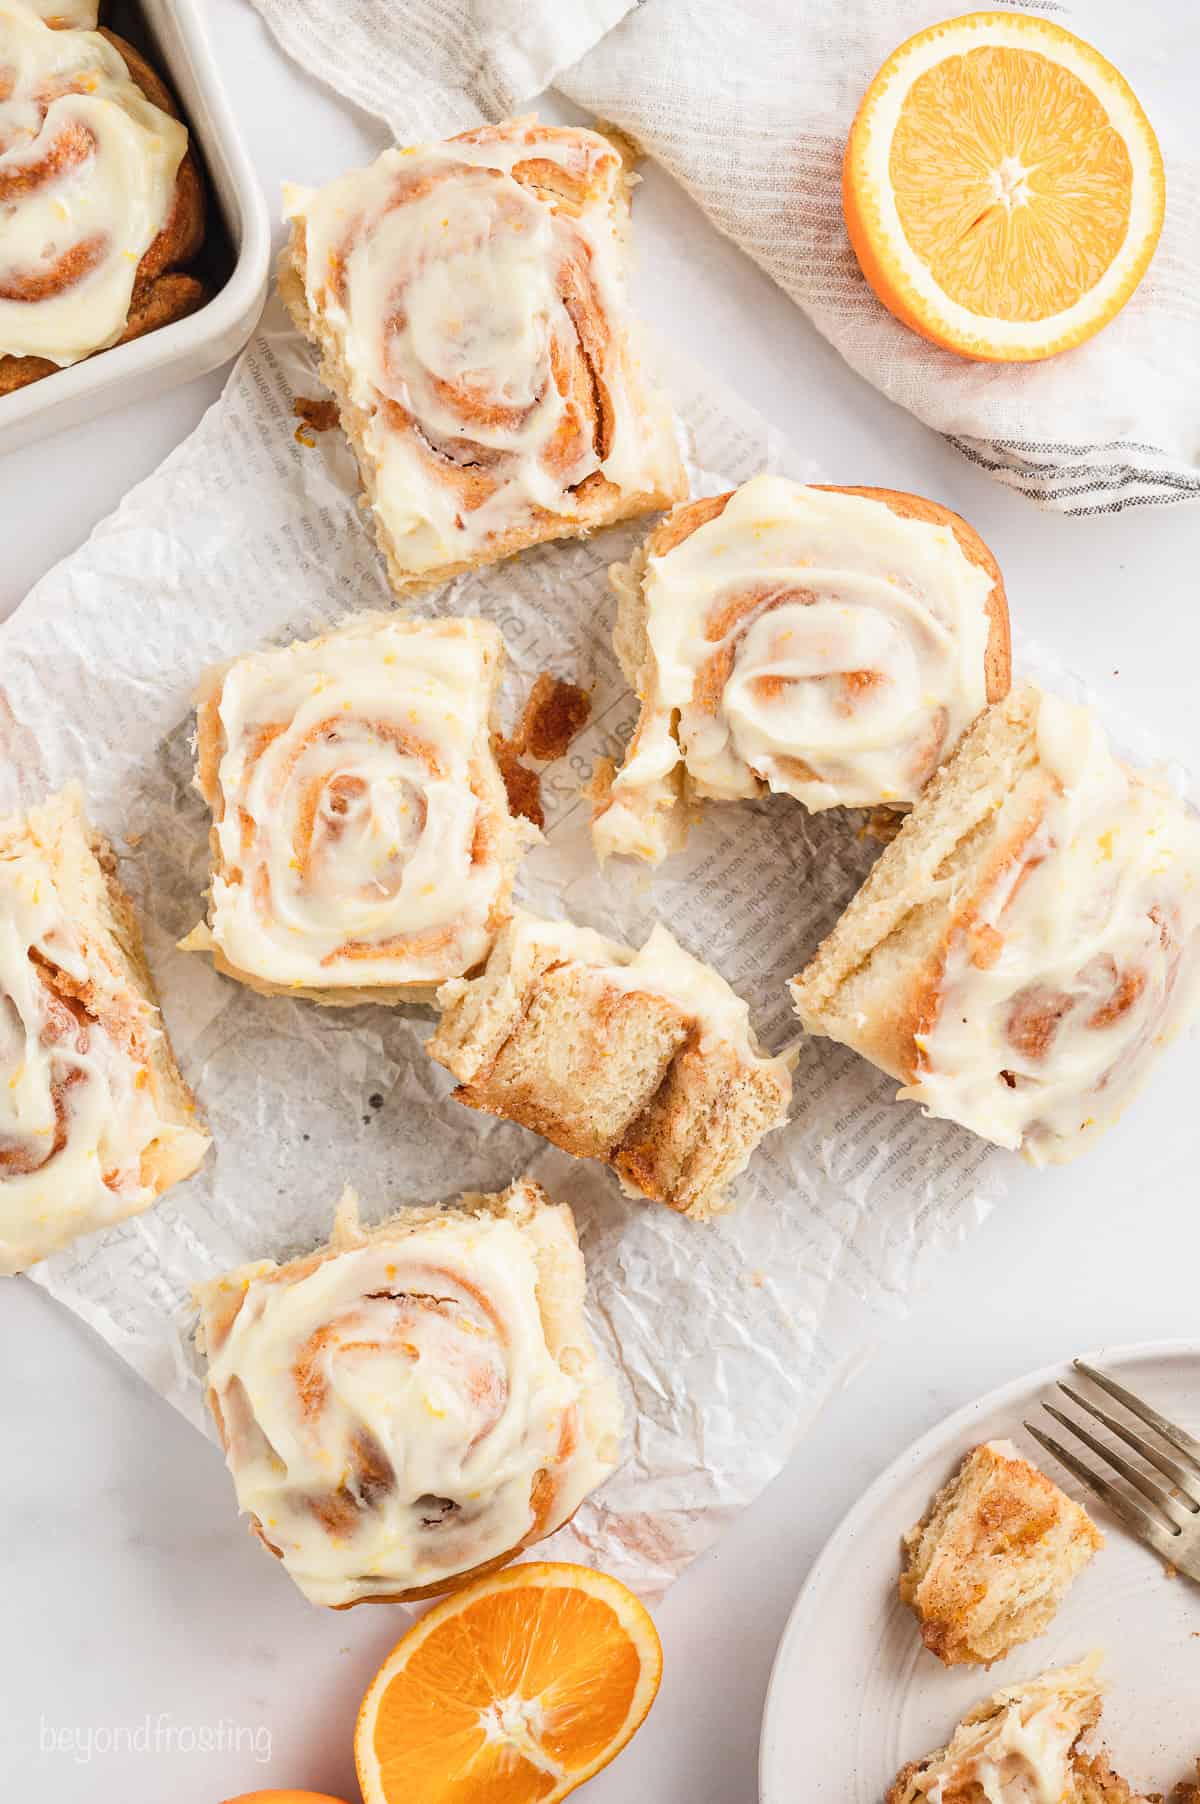 Overhead view of assorted orange cinnamon rolls on a piece of parchment paper, next to orange wedges.